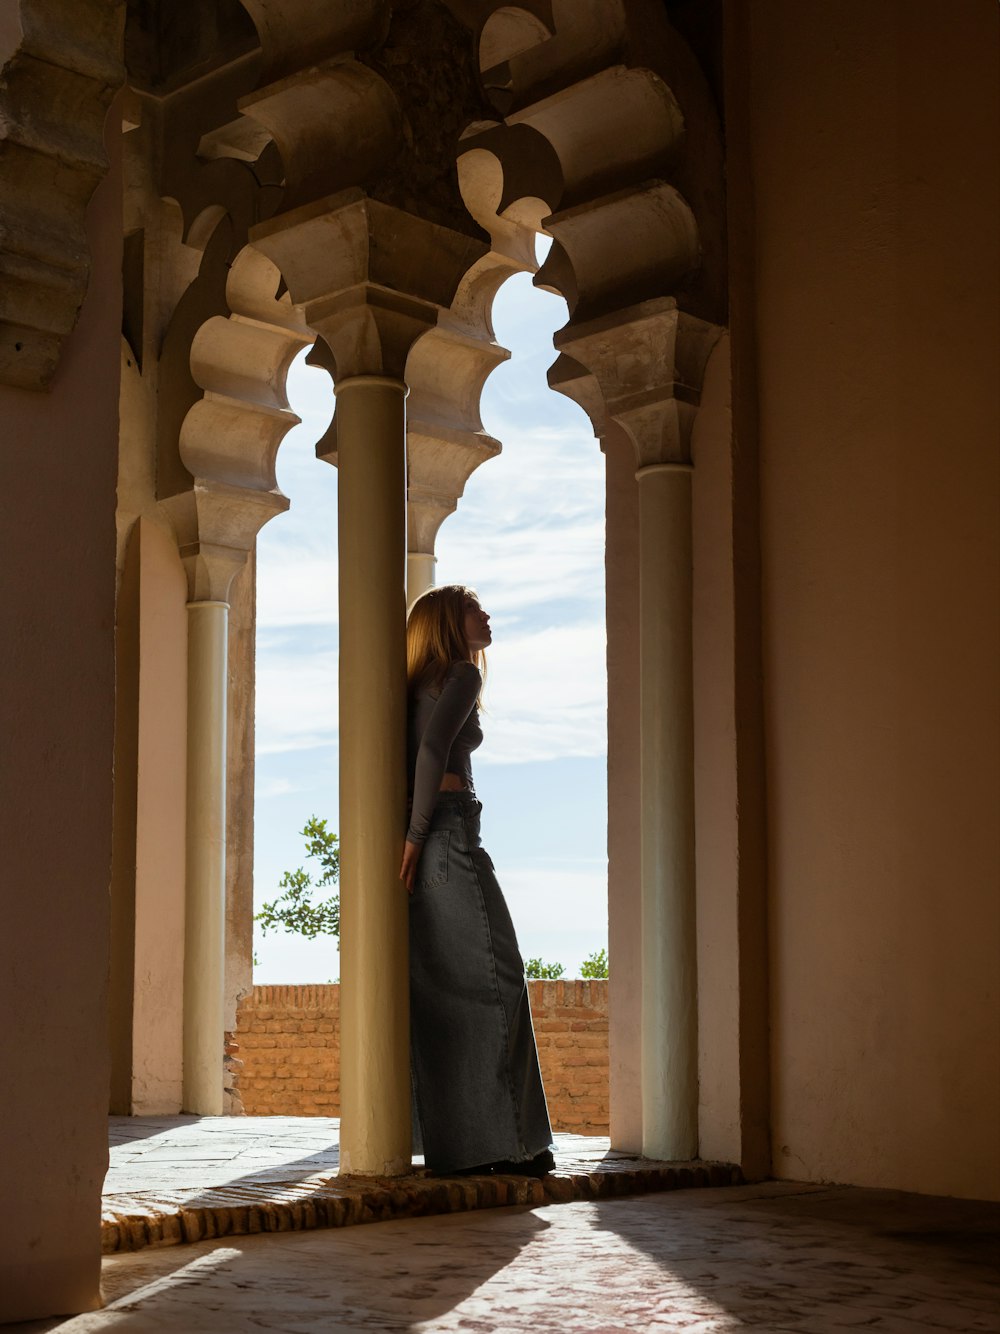 a woman in a long dress standing in an archway